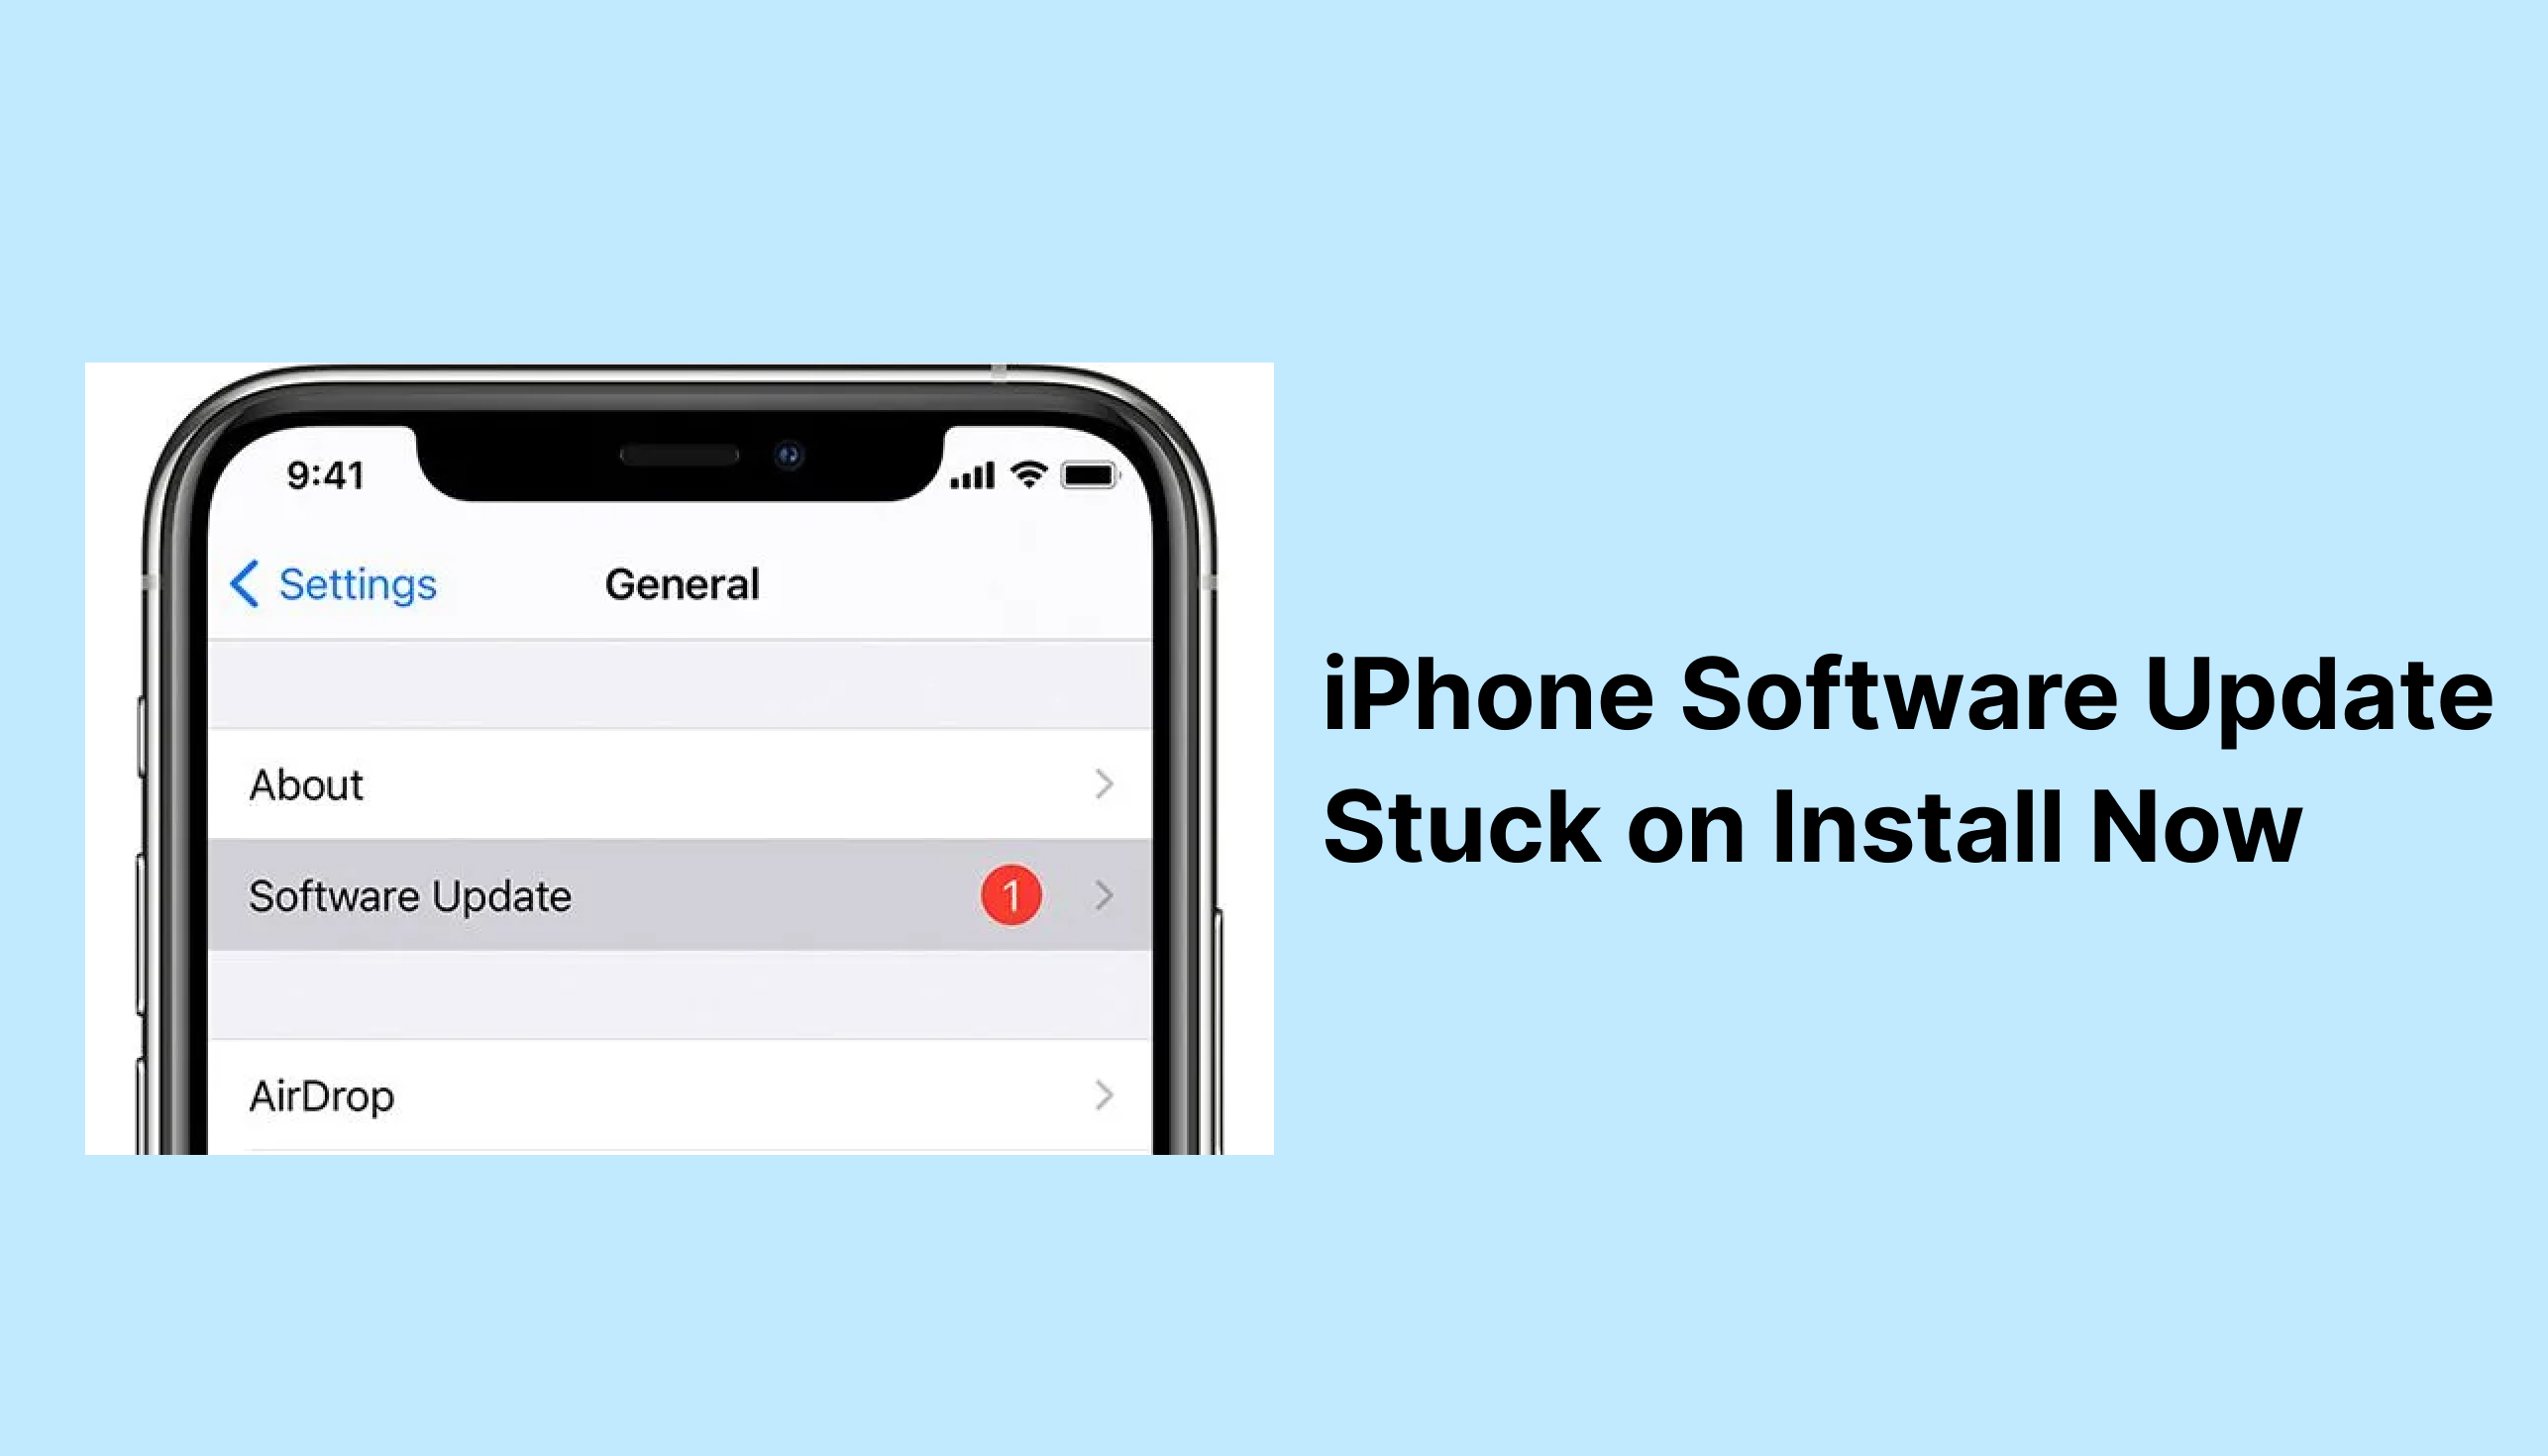 iPhone Software Update Stuck on Install Now? Try This